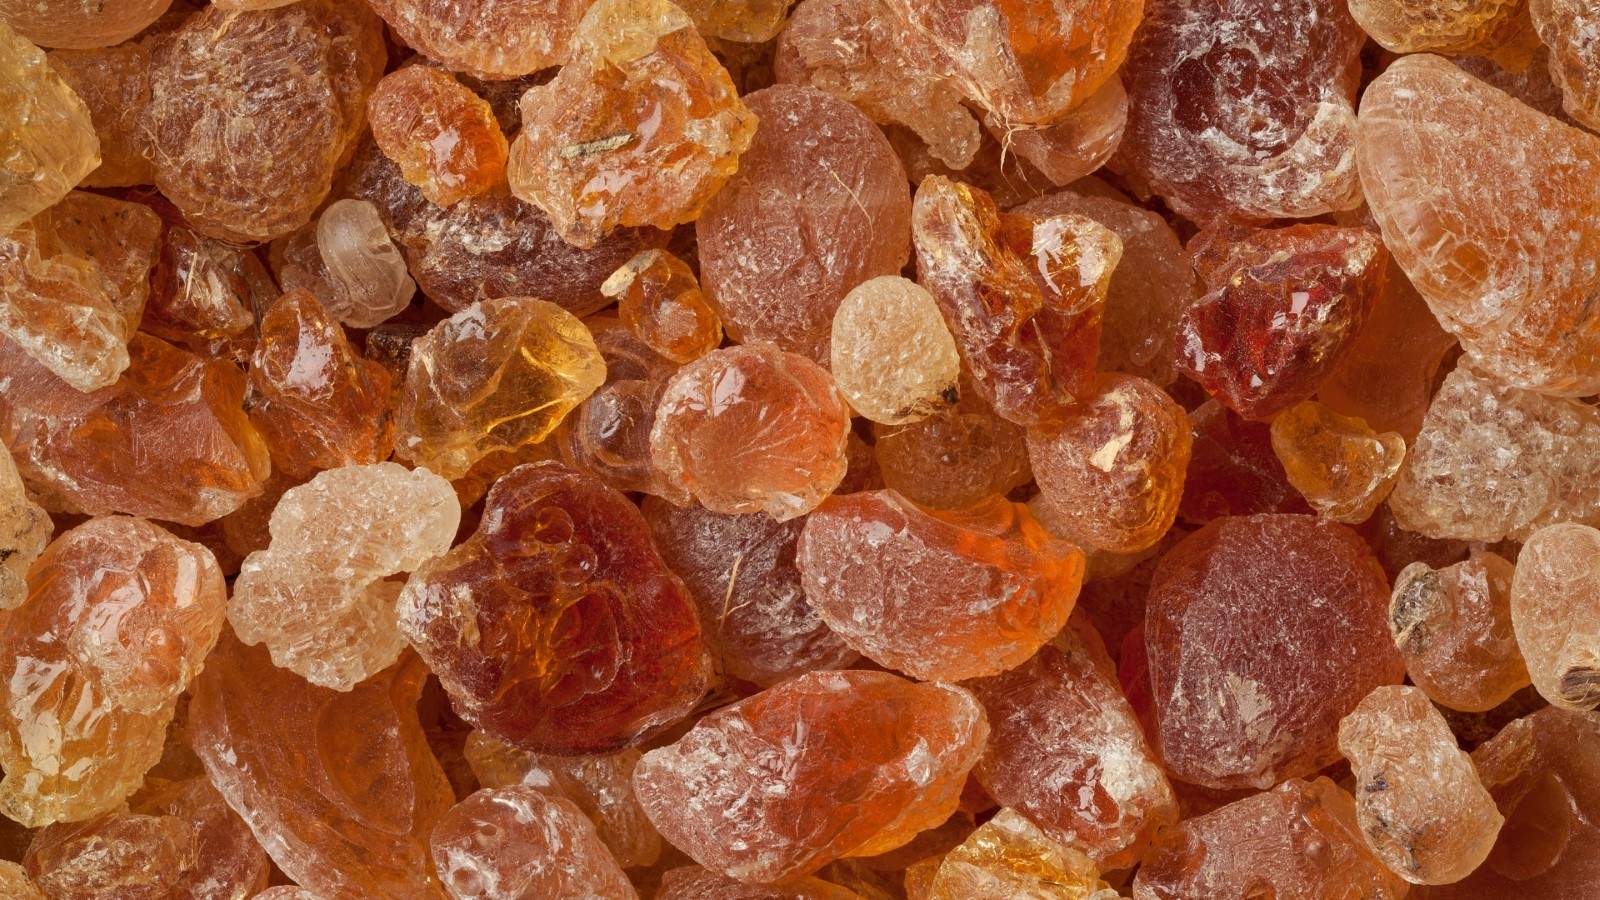 Gum arabic – the natural emulsifier, stabilizer, and mouthfeel enhancer